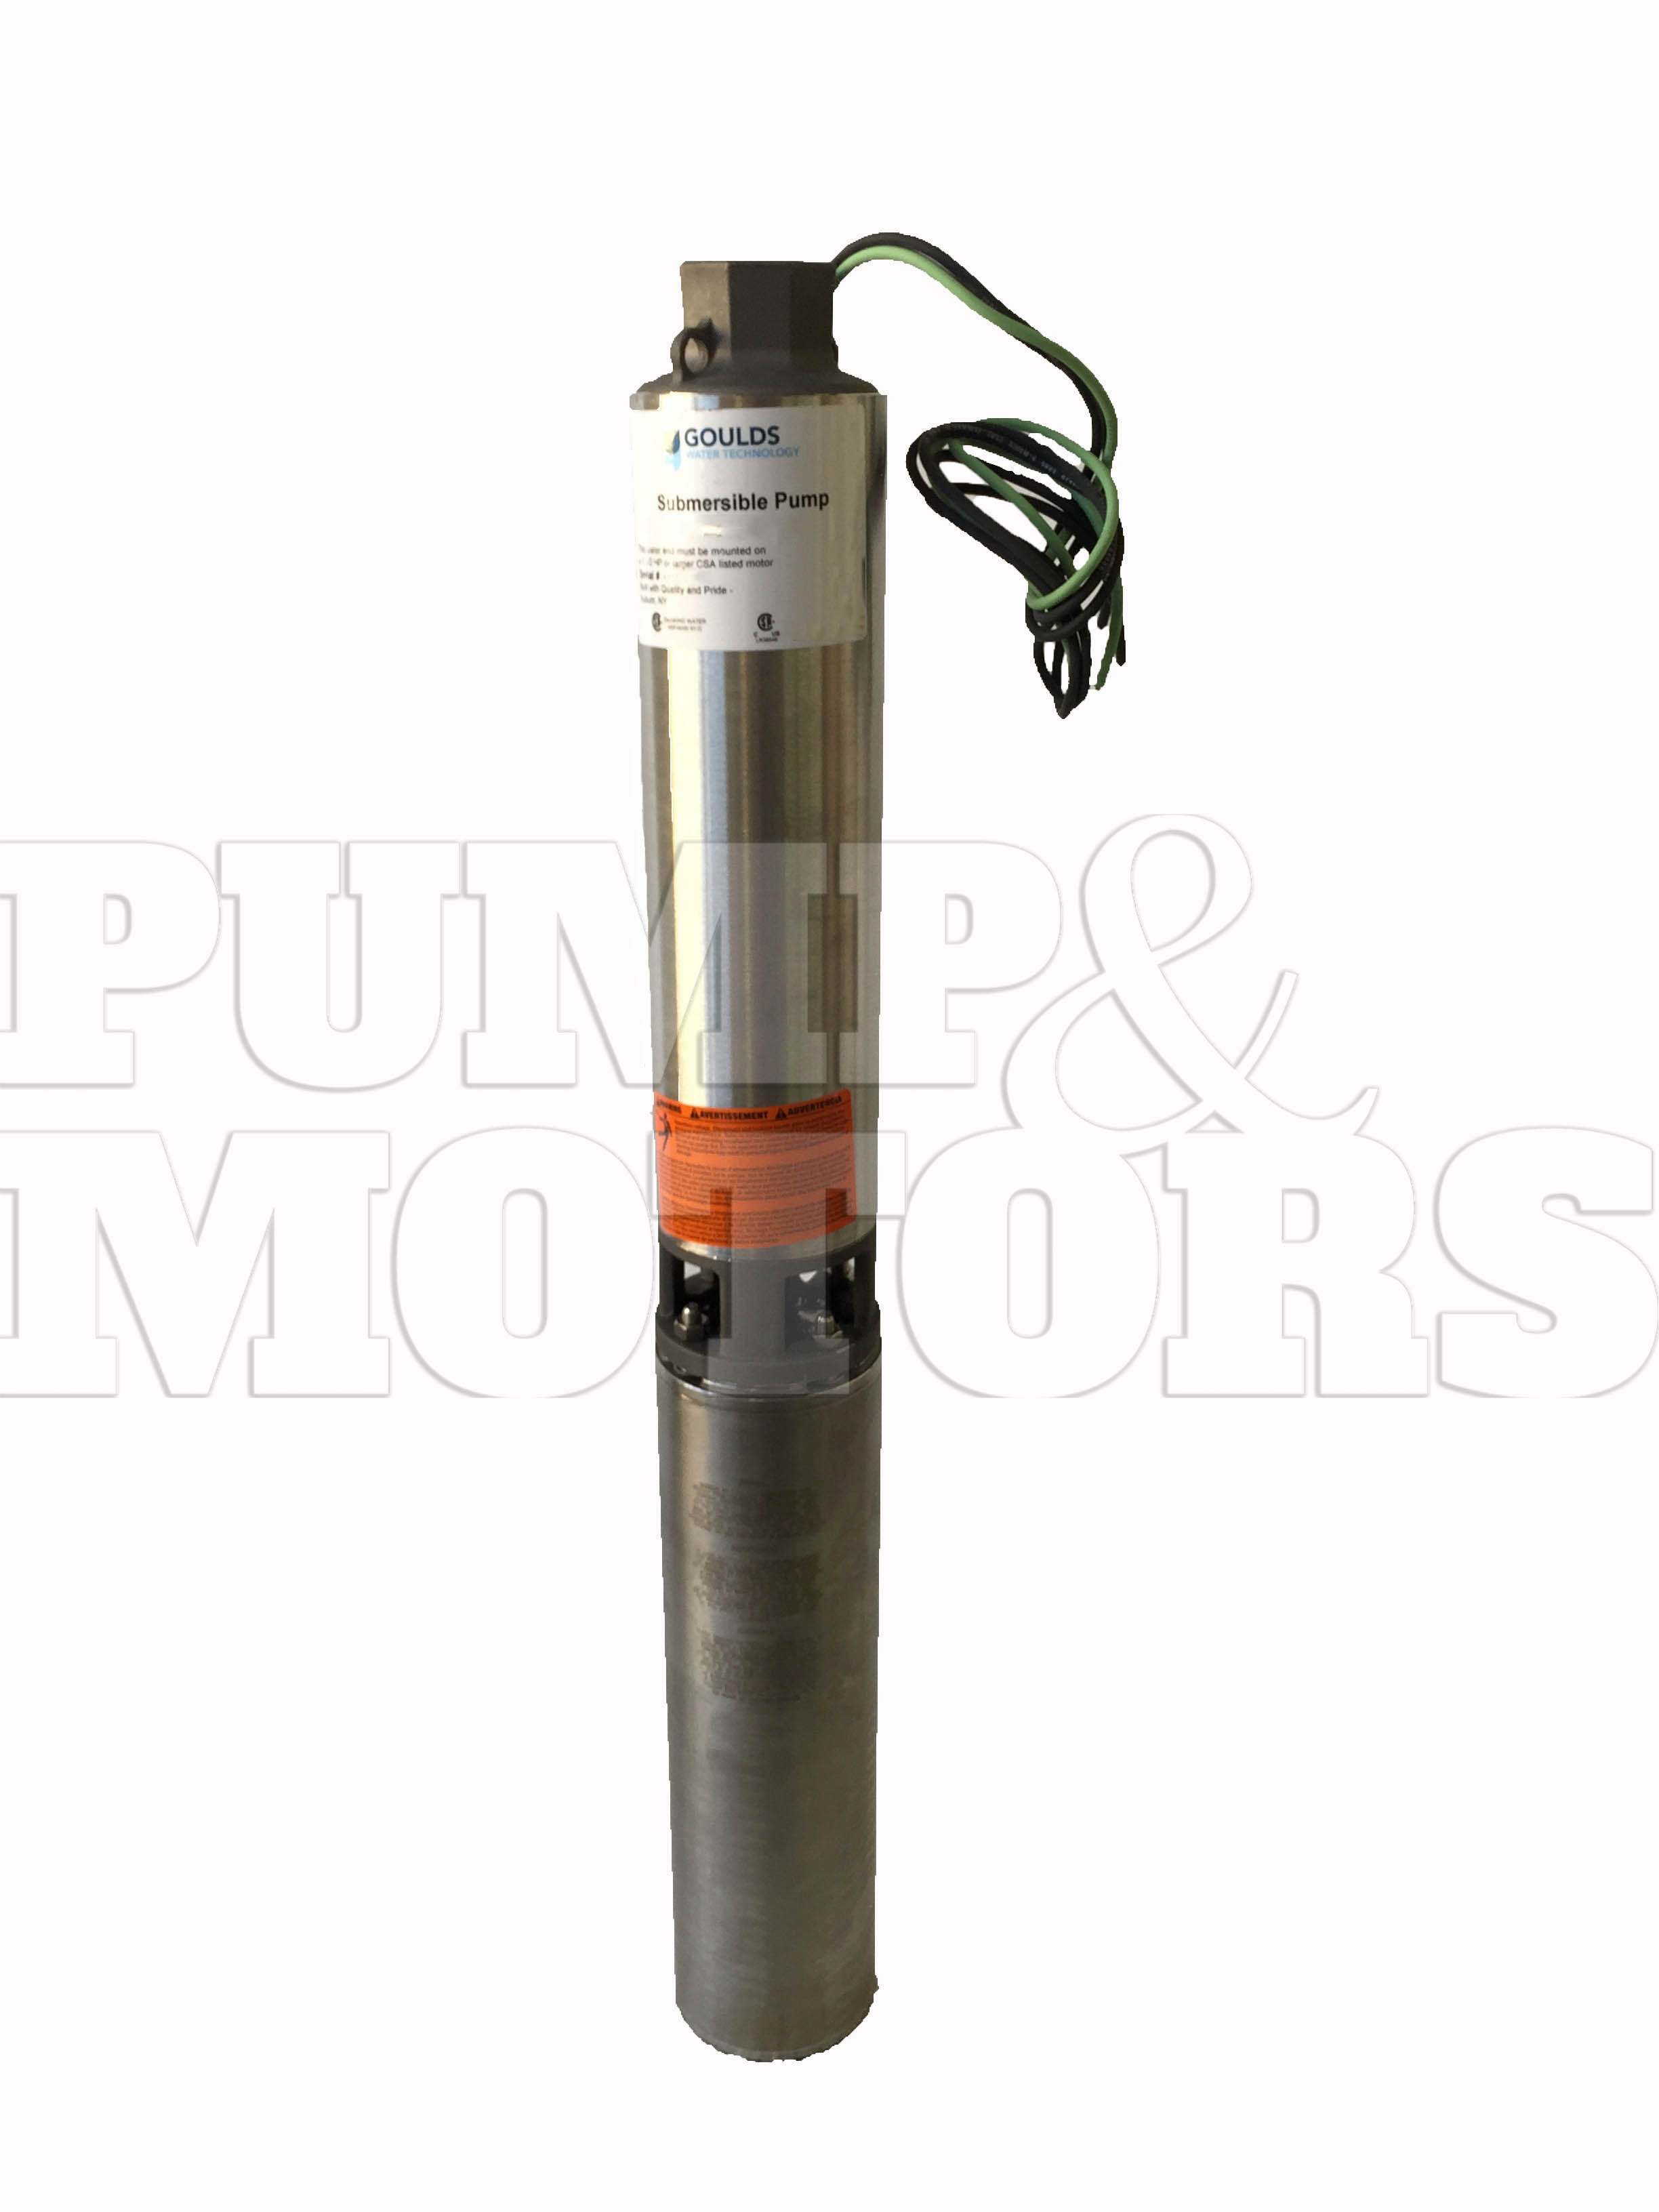 Goulds 5GS05422C 1/2 HP 230V Submersible Water Well Pump 5GPM